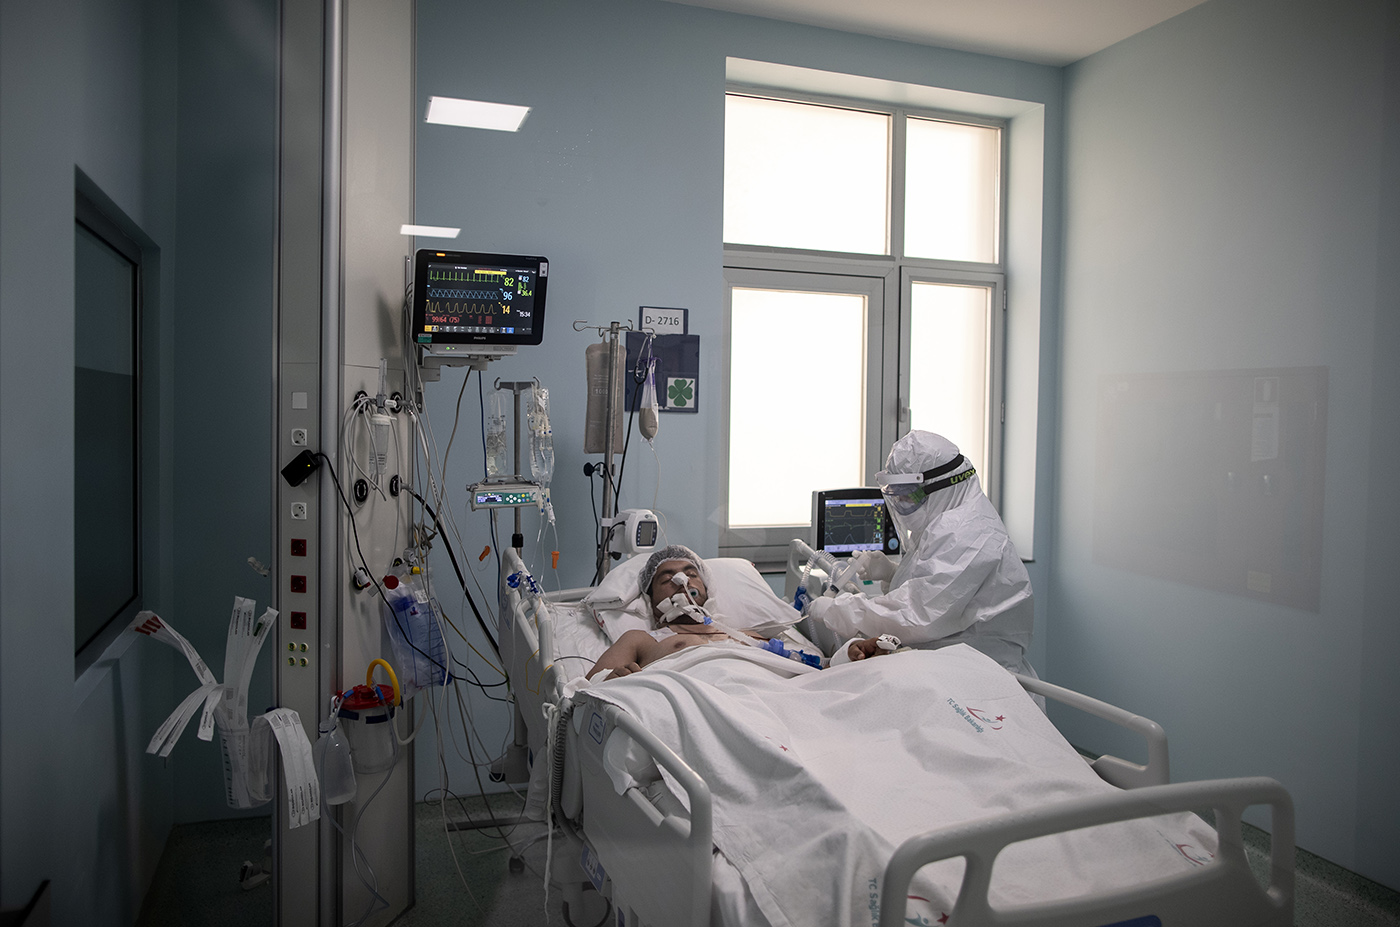 A medical worker wearing Personal Protective Equipment (PPE) attends to a COVID-19 patient at intensive care of the Sancaktepe Martyr Prof Dr Ilhan Varank Training and Research Hospital in Istanbul, Turkey, 11 May 2020.